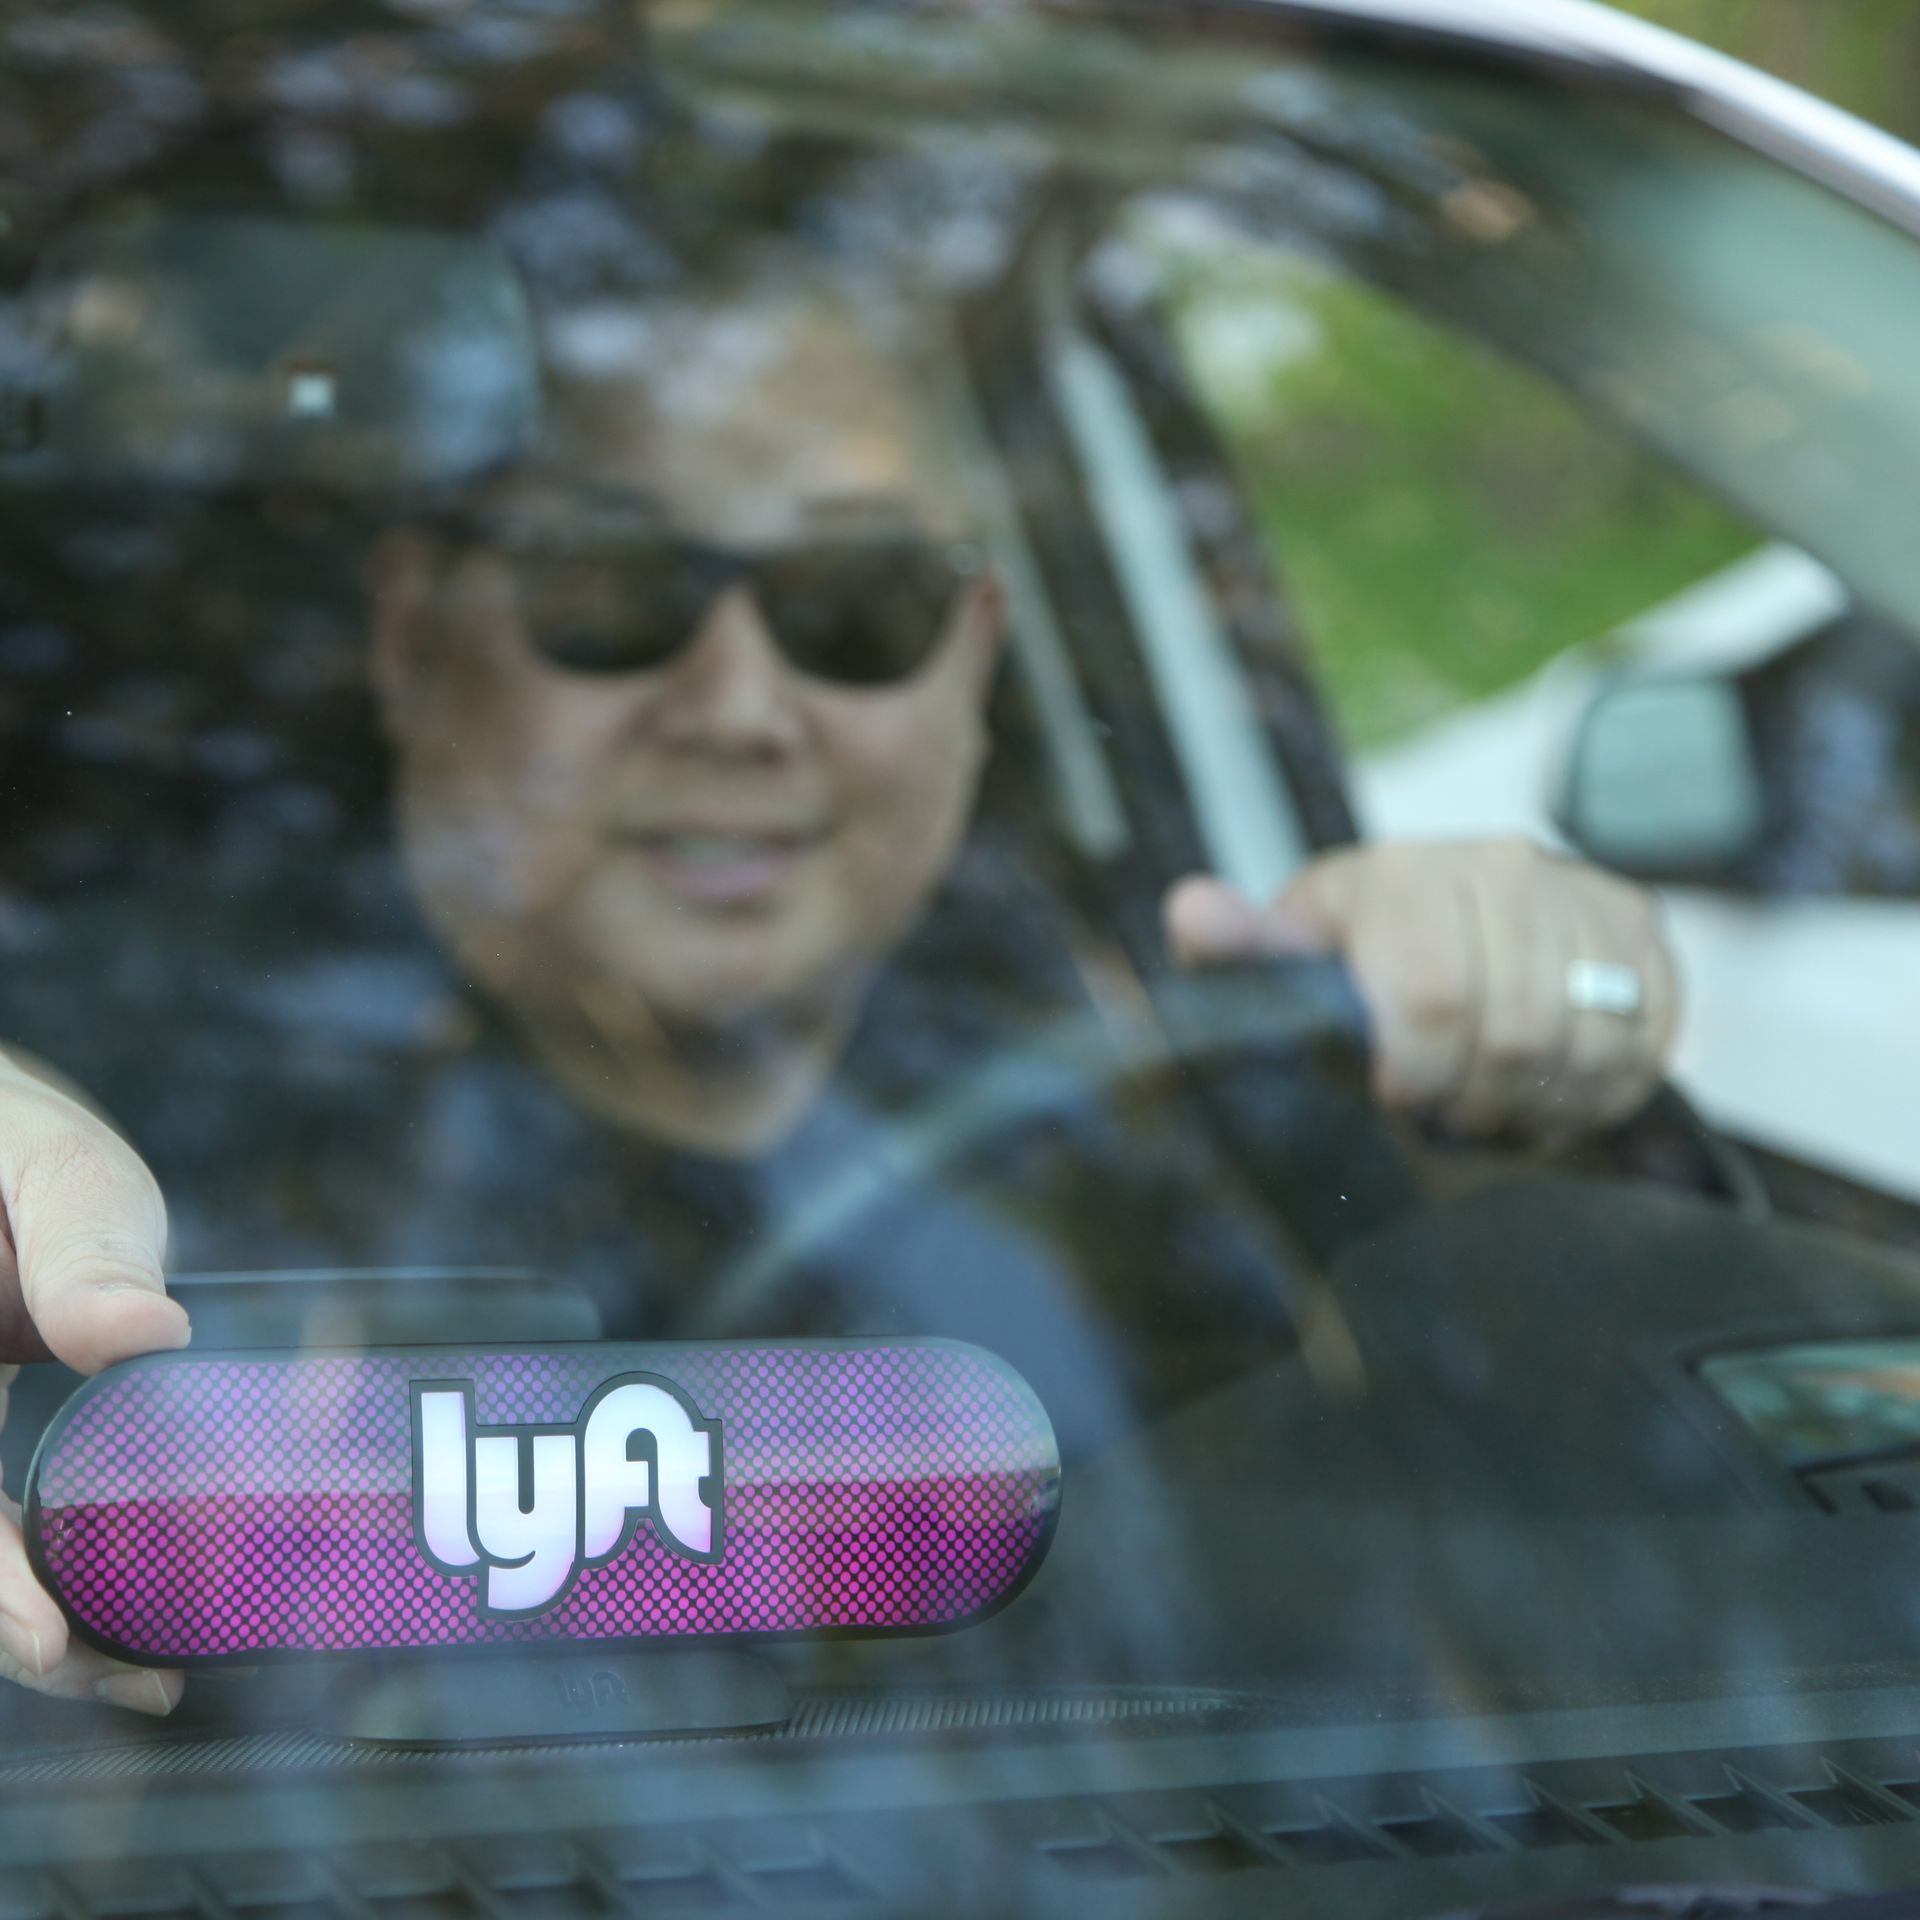 Driver behind the wheel with an illuminated Lyft sign on dashboard